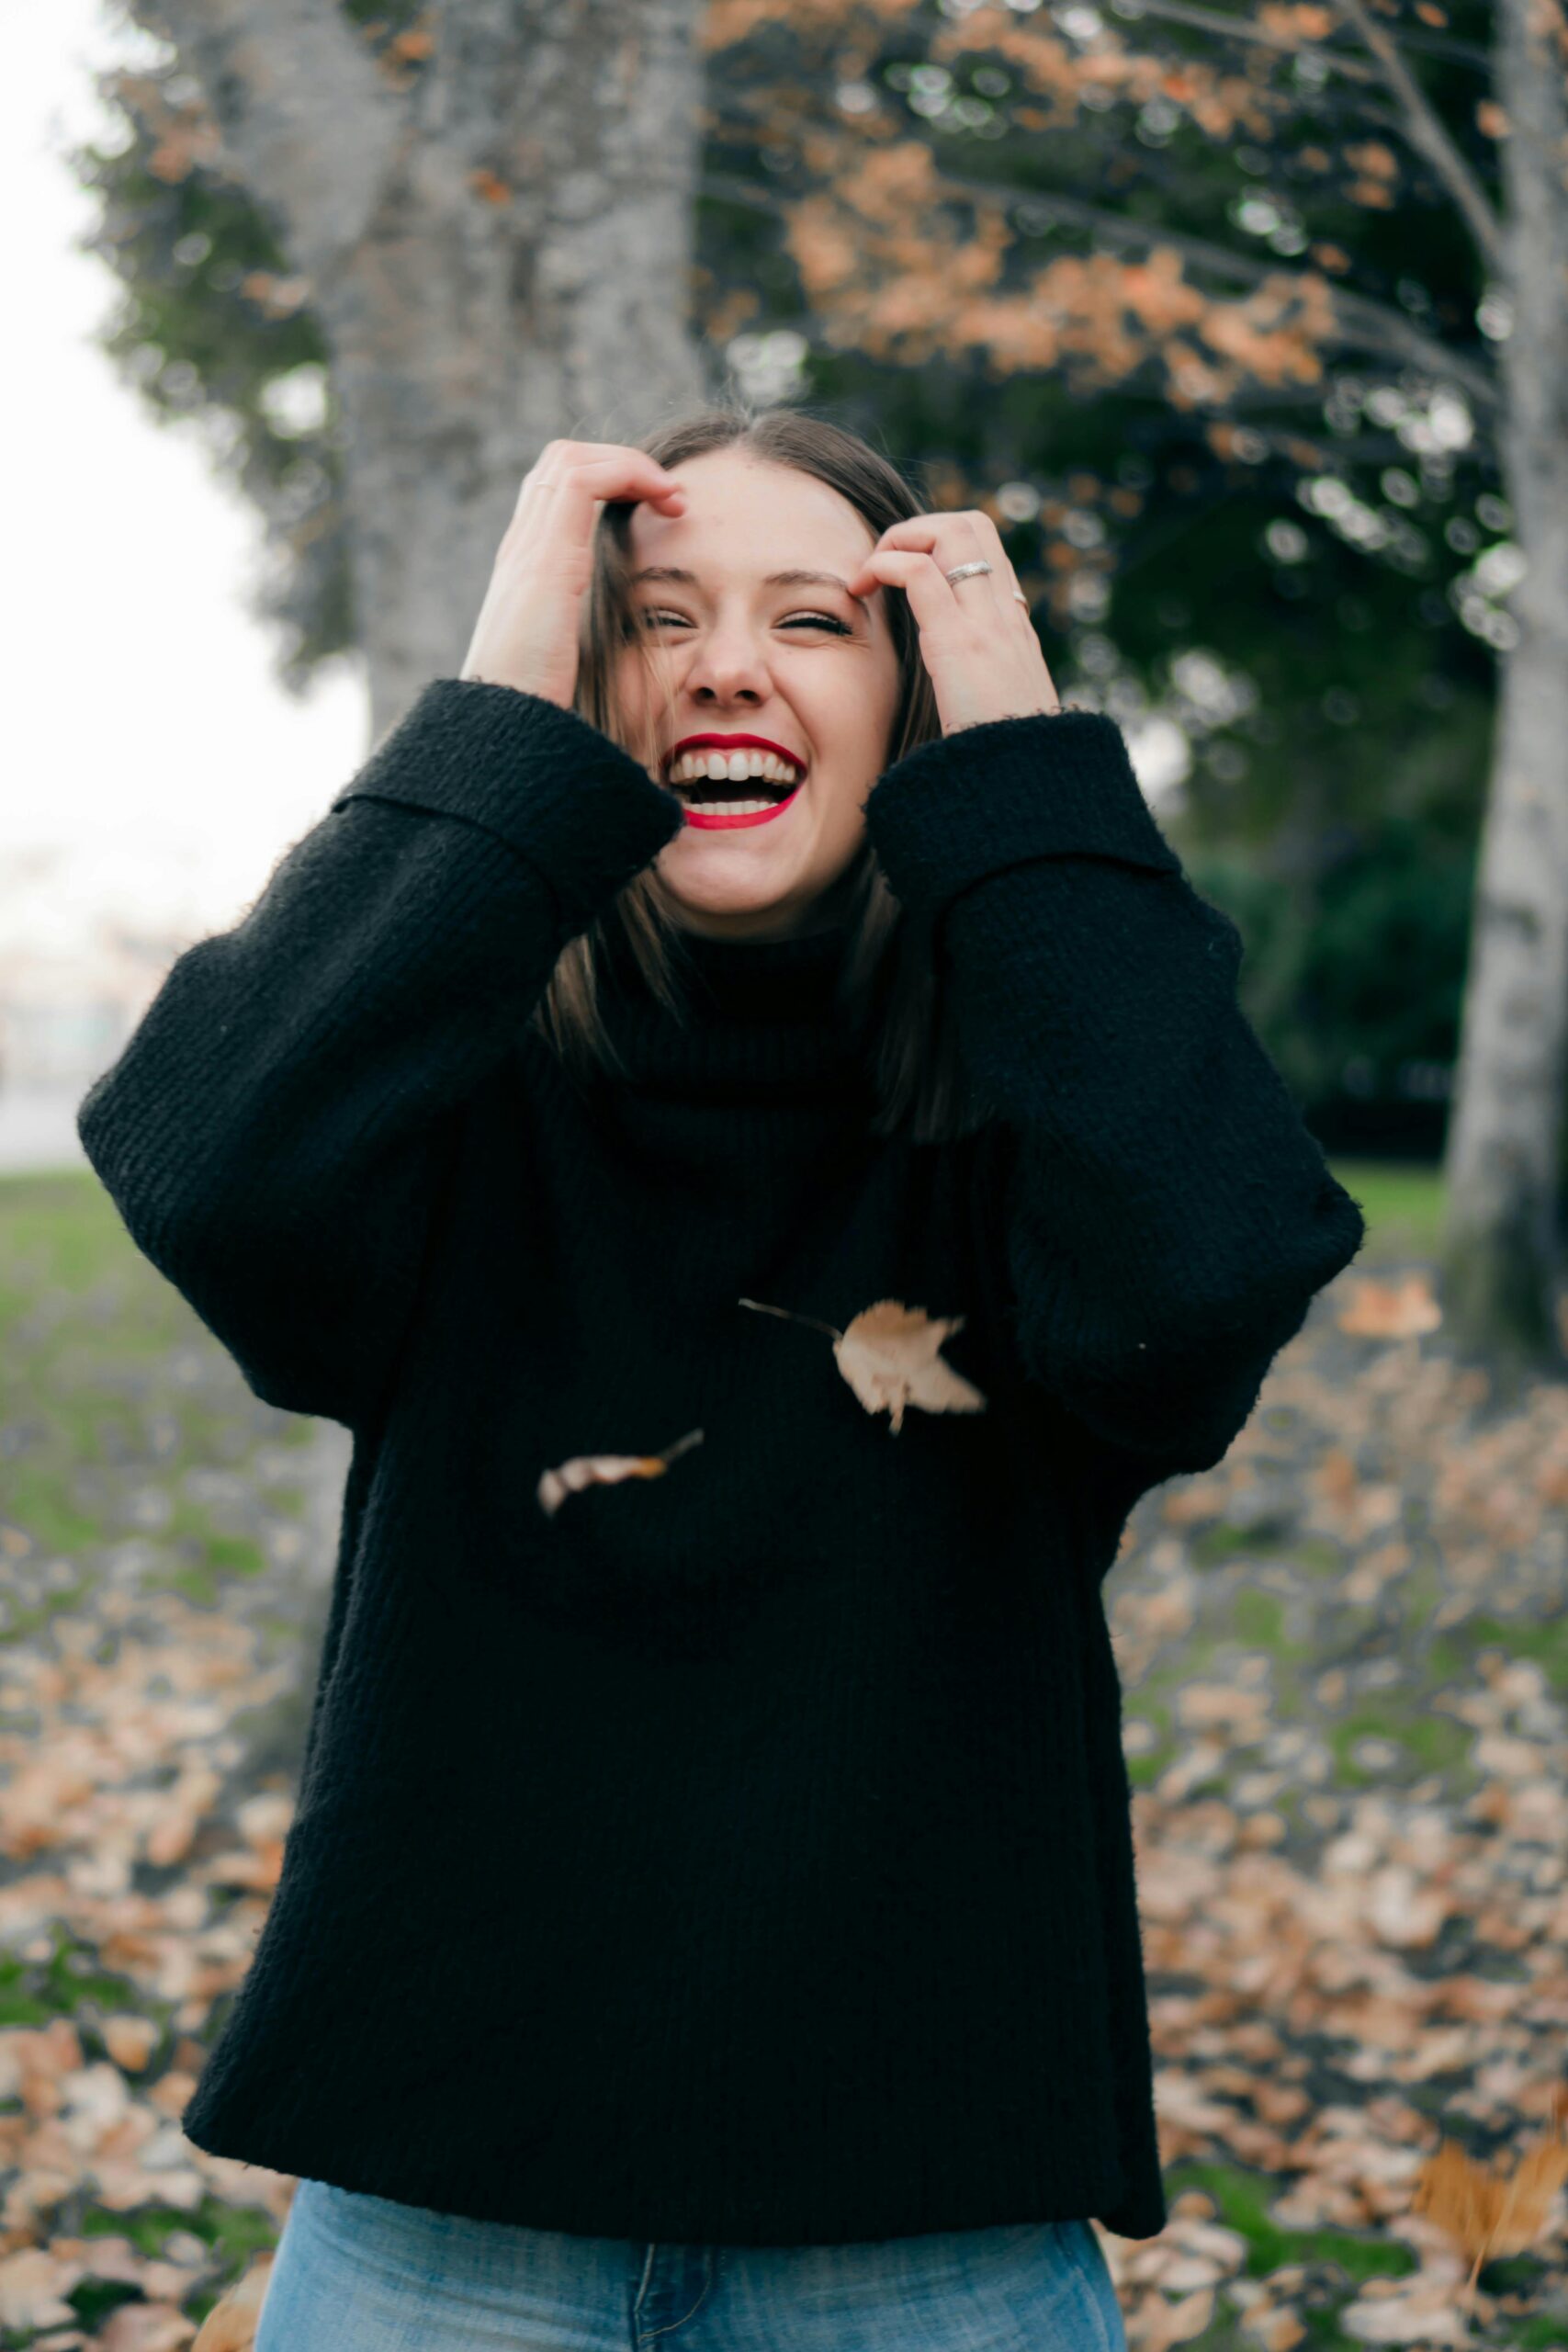 Woman smiling, pulling hair behind her ears. Trees in background. Fall.